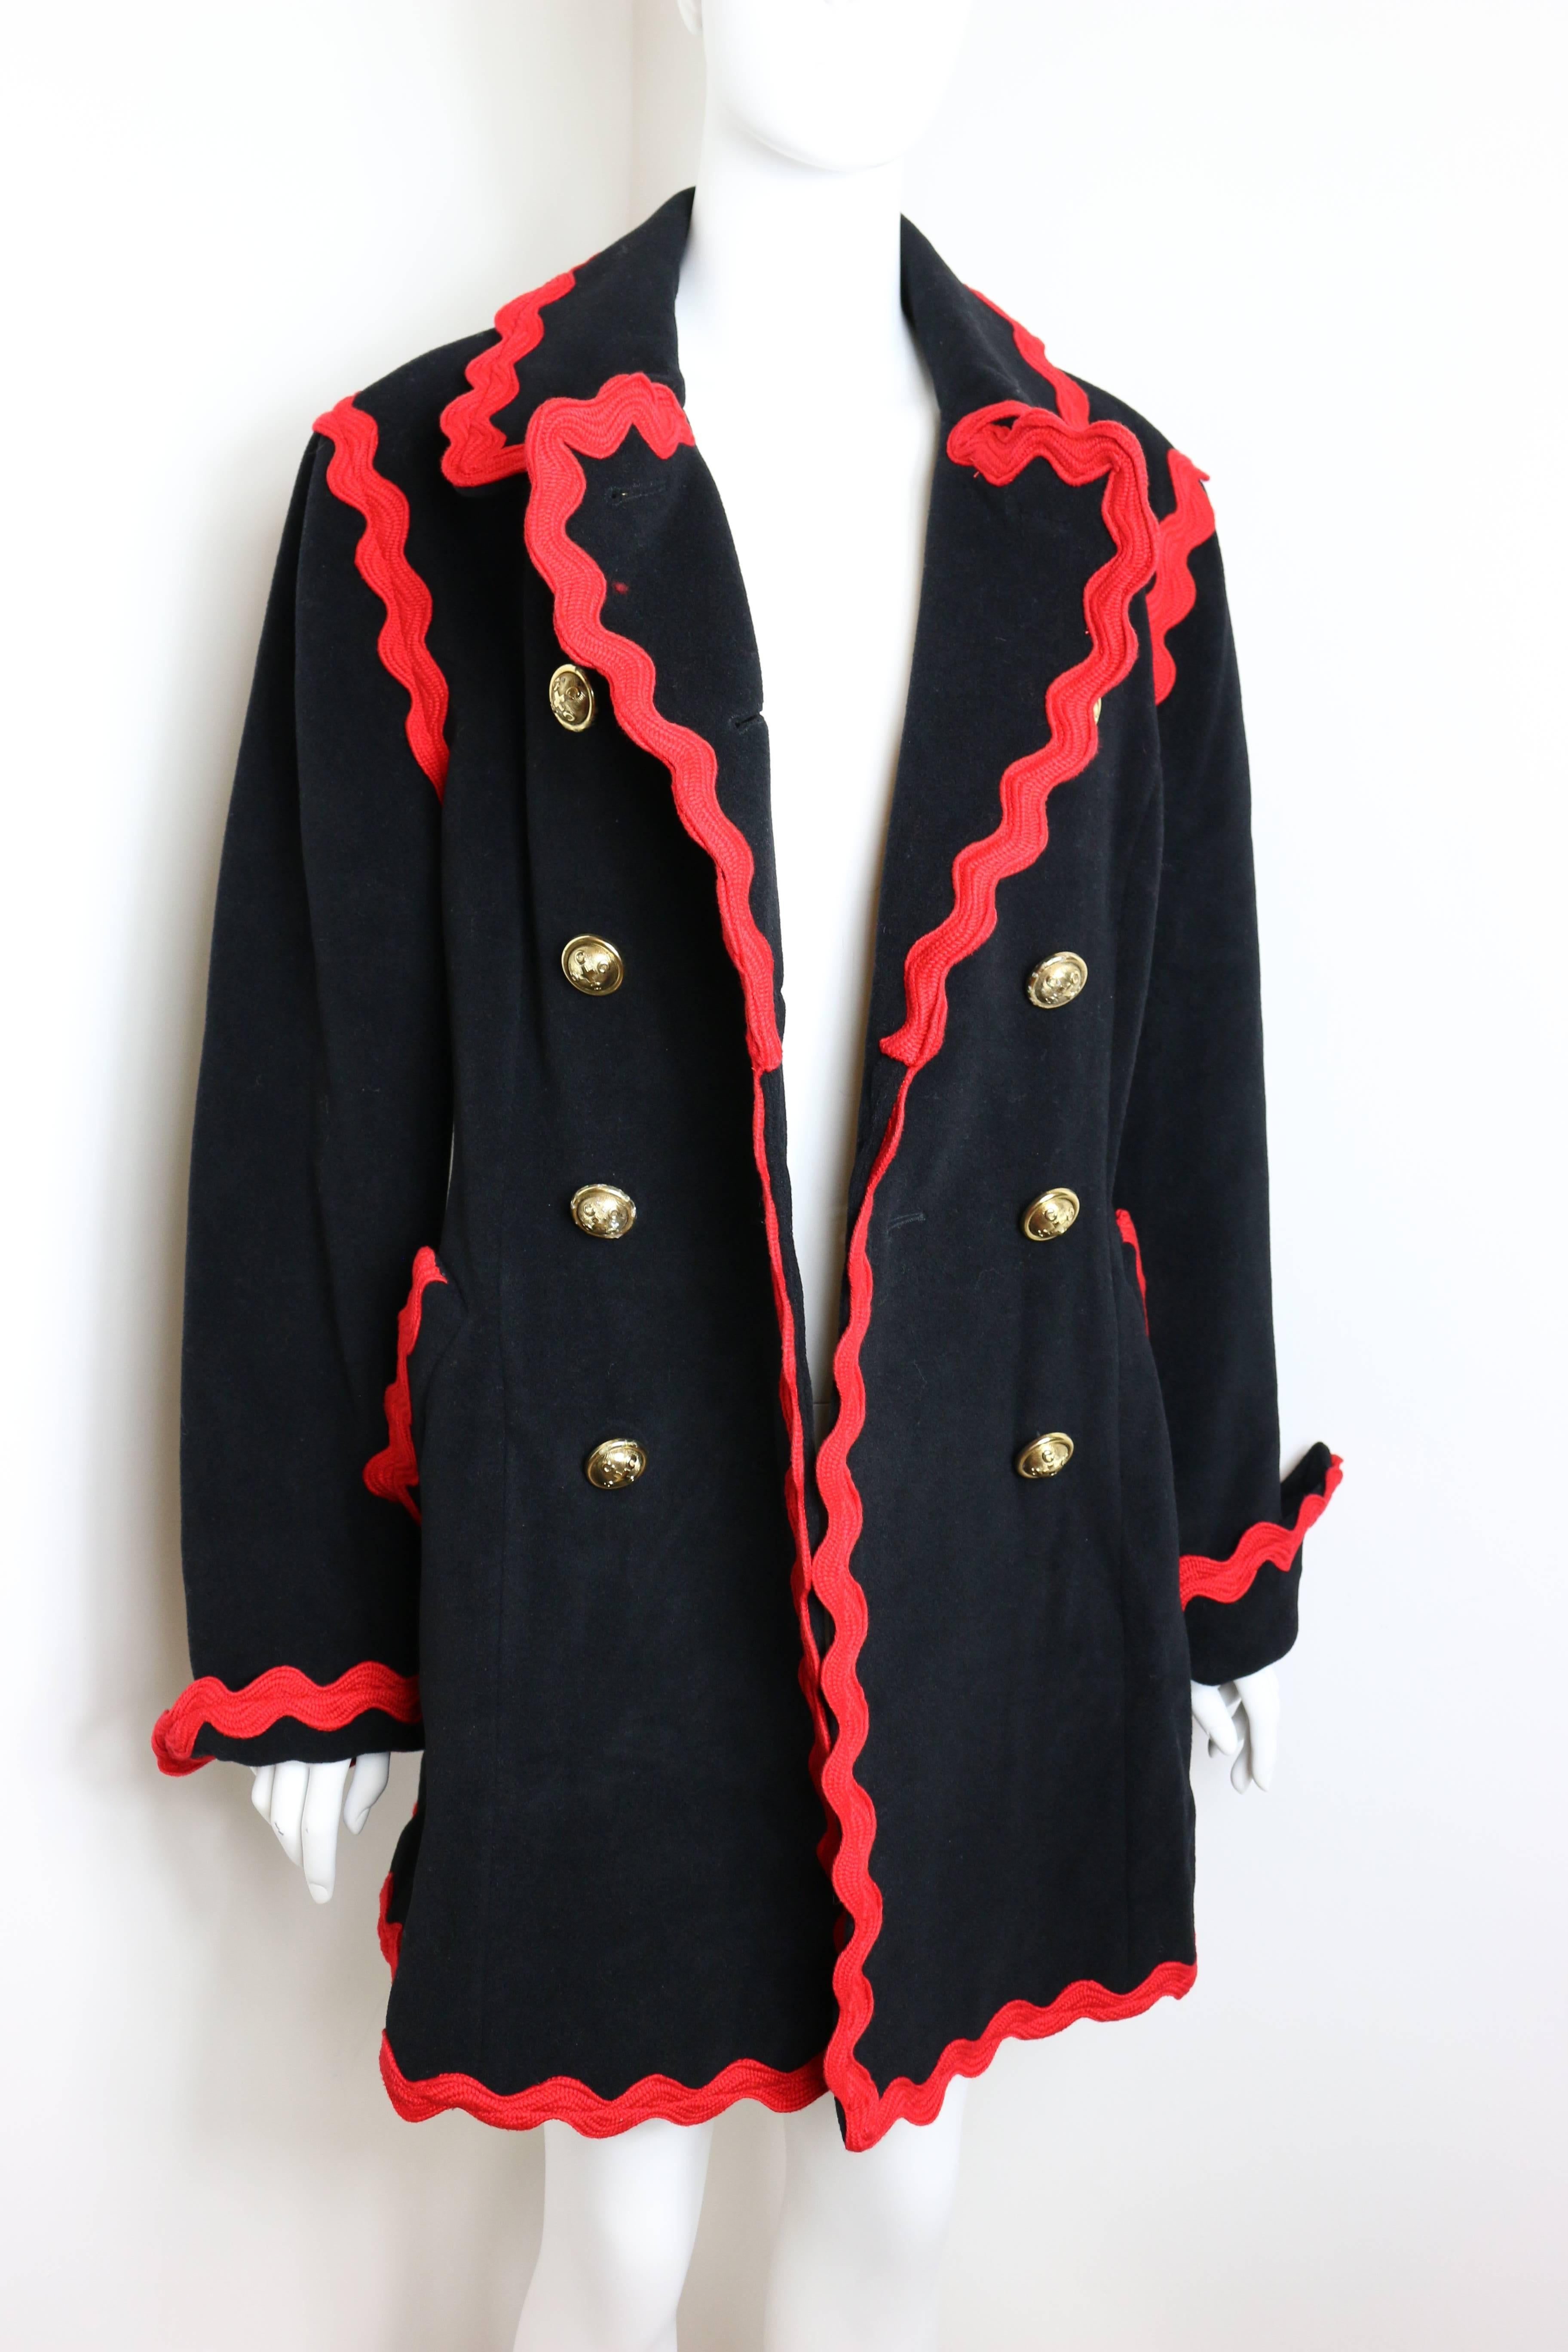 Moschino Black Wool Red Piping Trim Double Breasted Coat 1